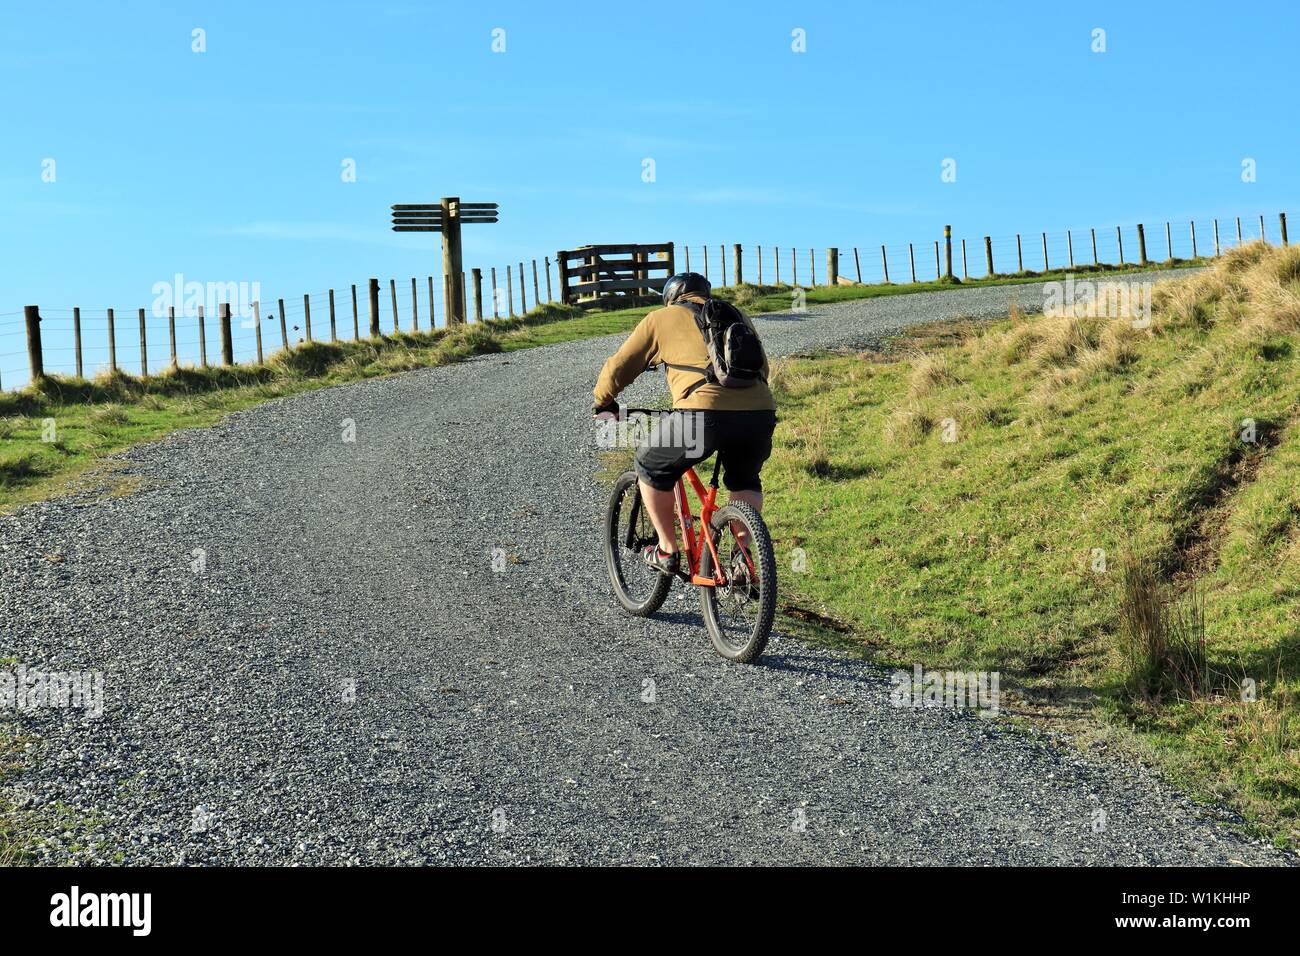 A senior citizen riding a bicycle on sunny day in New Zealand Stock Photo